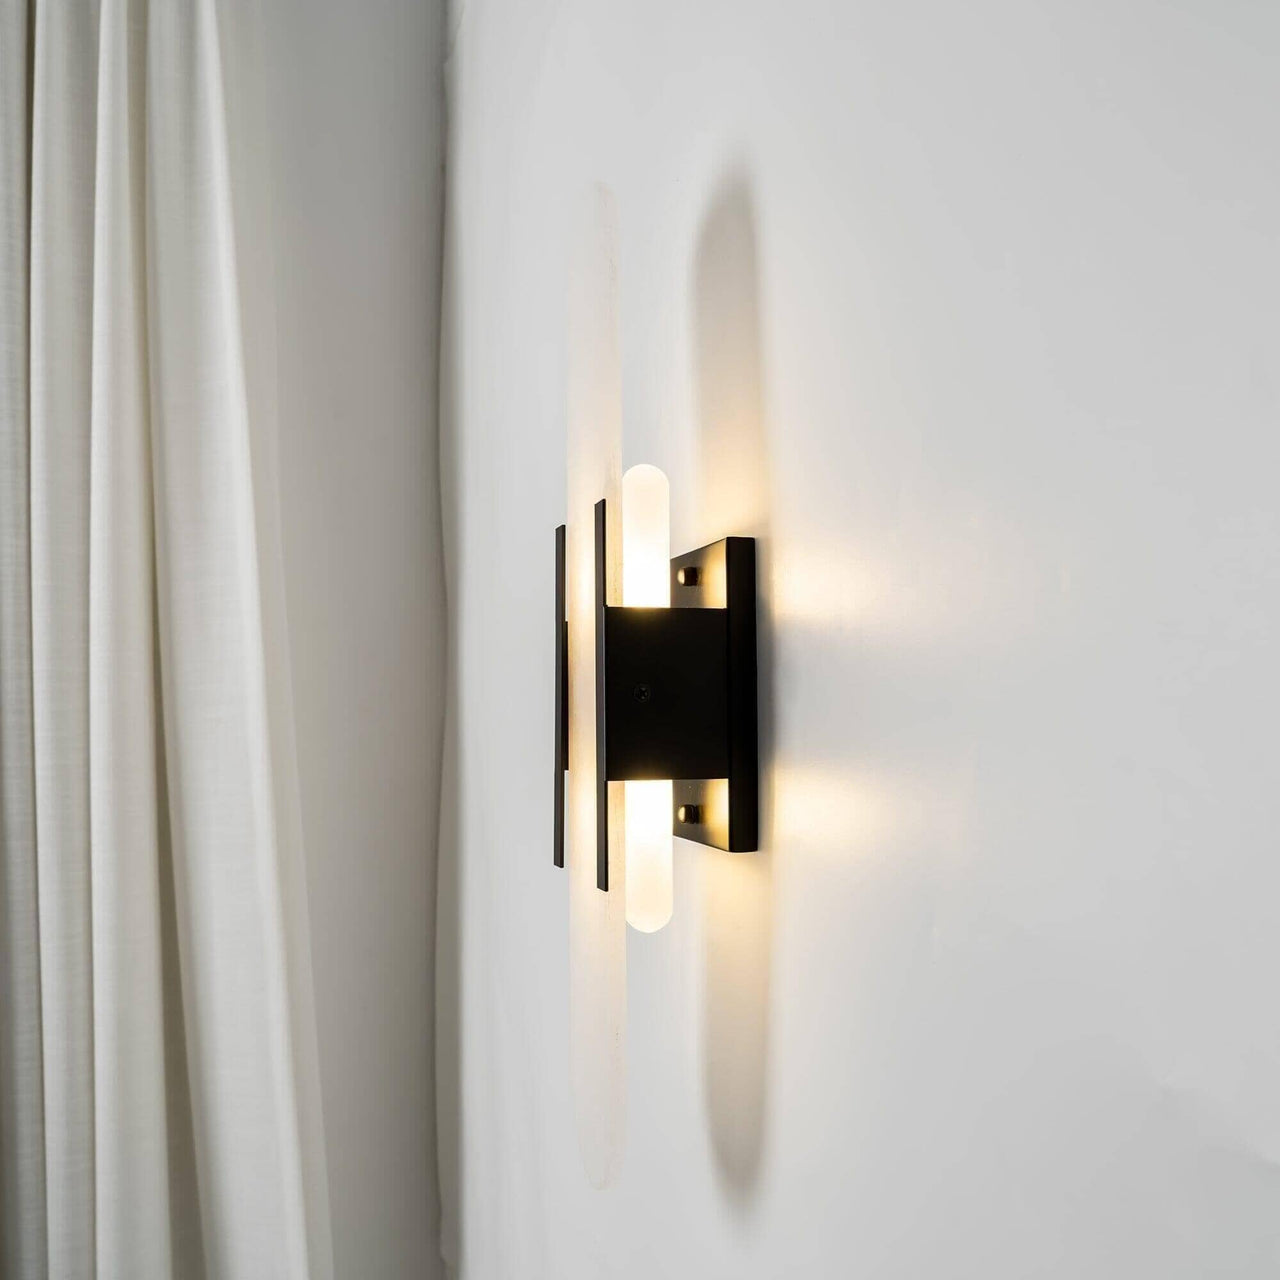 "Alabaster Dream" Marble Wall Lamp Sconce in Black / Gold Wall Sconce Lamp Artedimo 